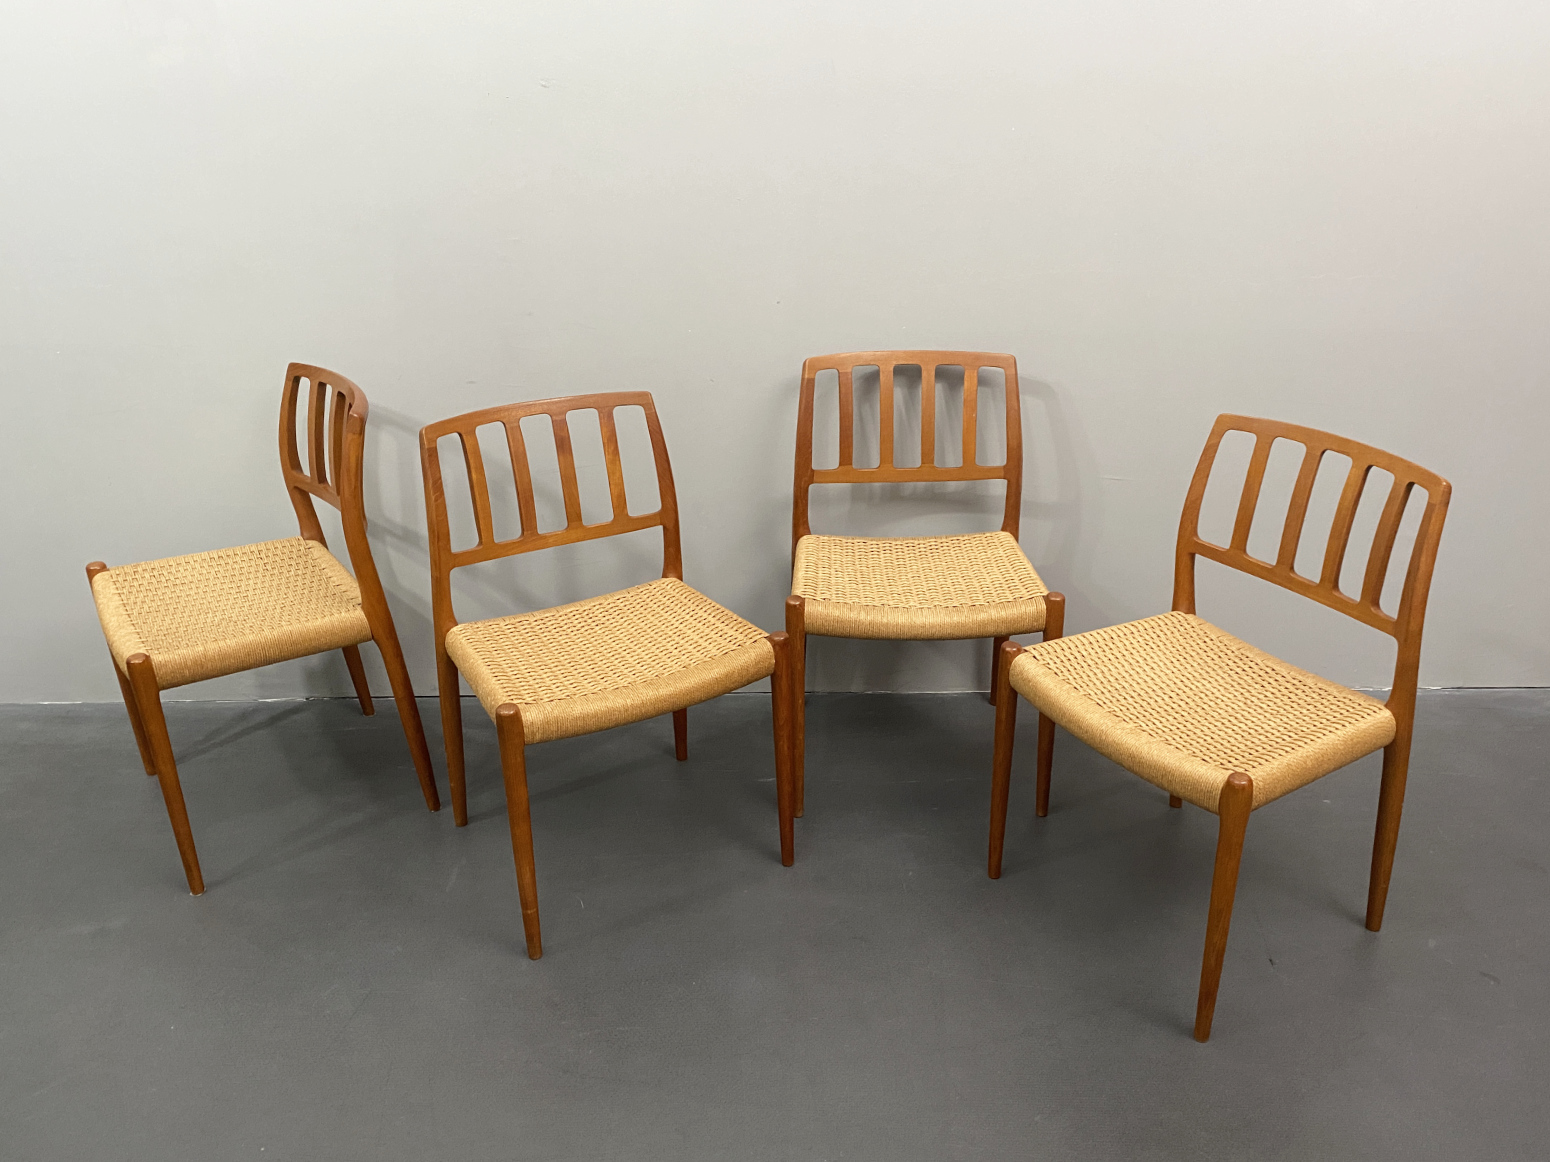 Set of 4 Dining Chairs, Teak, Model 83 by Niels Otto Möller for JL Möllers